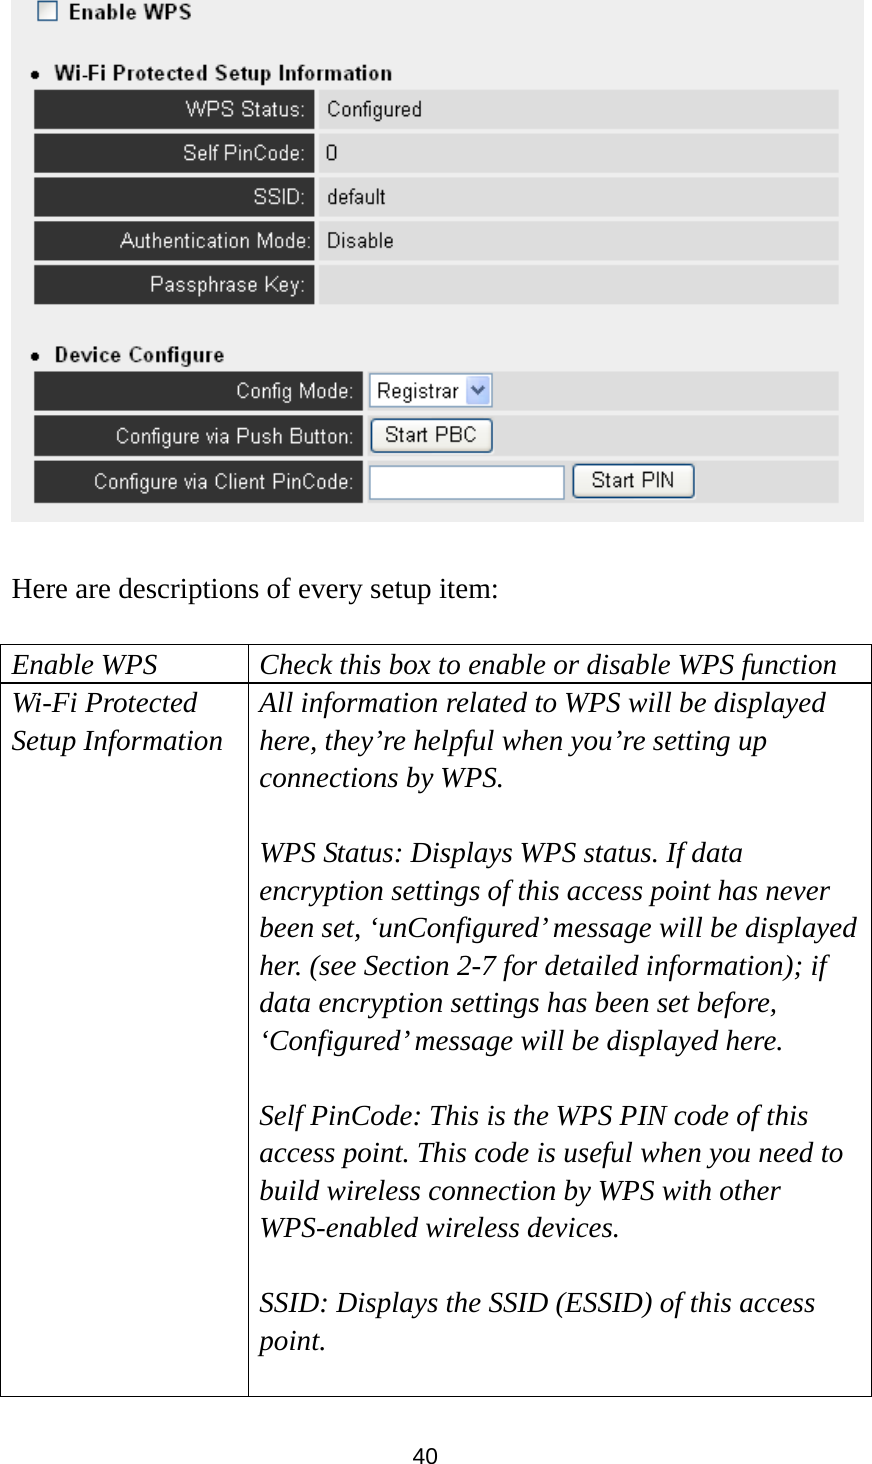  40   Here are descriptions of every setup item:  Enable WPS  Check this box to enable or disable WPS function Wi-Fi Protected Setup Information All information related to WPS will be displayed here, they’re helpful when you’re setting up connections by WPS.  WPS Status: Displays WPS status. If data encryption settings of this access point has never been set, ‘unConfigured’ message will be displayed her. (see Section 2-7 for detailed information); if data encryption settings has been set before, ‘Configured’ message will be displayed here.    Self PinCode: This is the WPS PIN code of this access point. This code is useful when you need to build wireless connection by WPS with other WPS-enabled wireless devices.  SSID: Displays the SSID (ESSID) of this access point.  